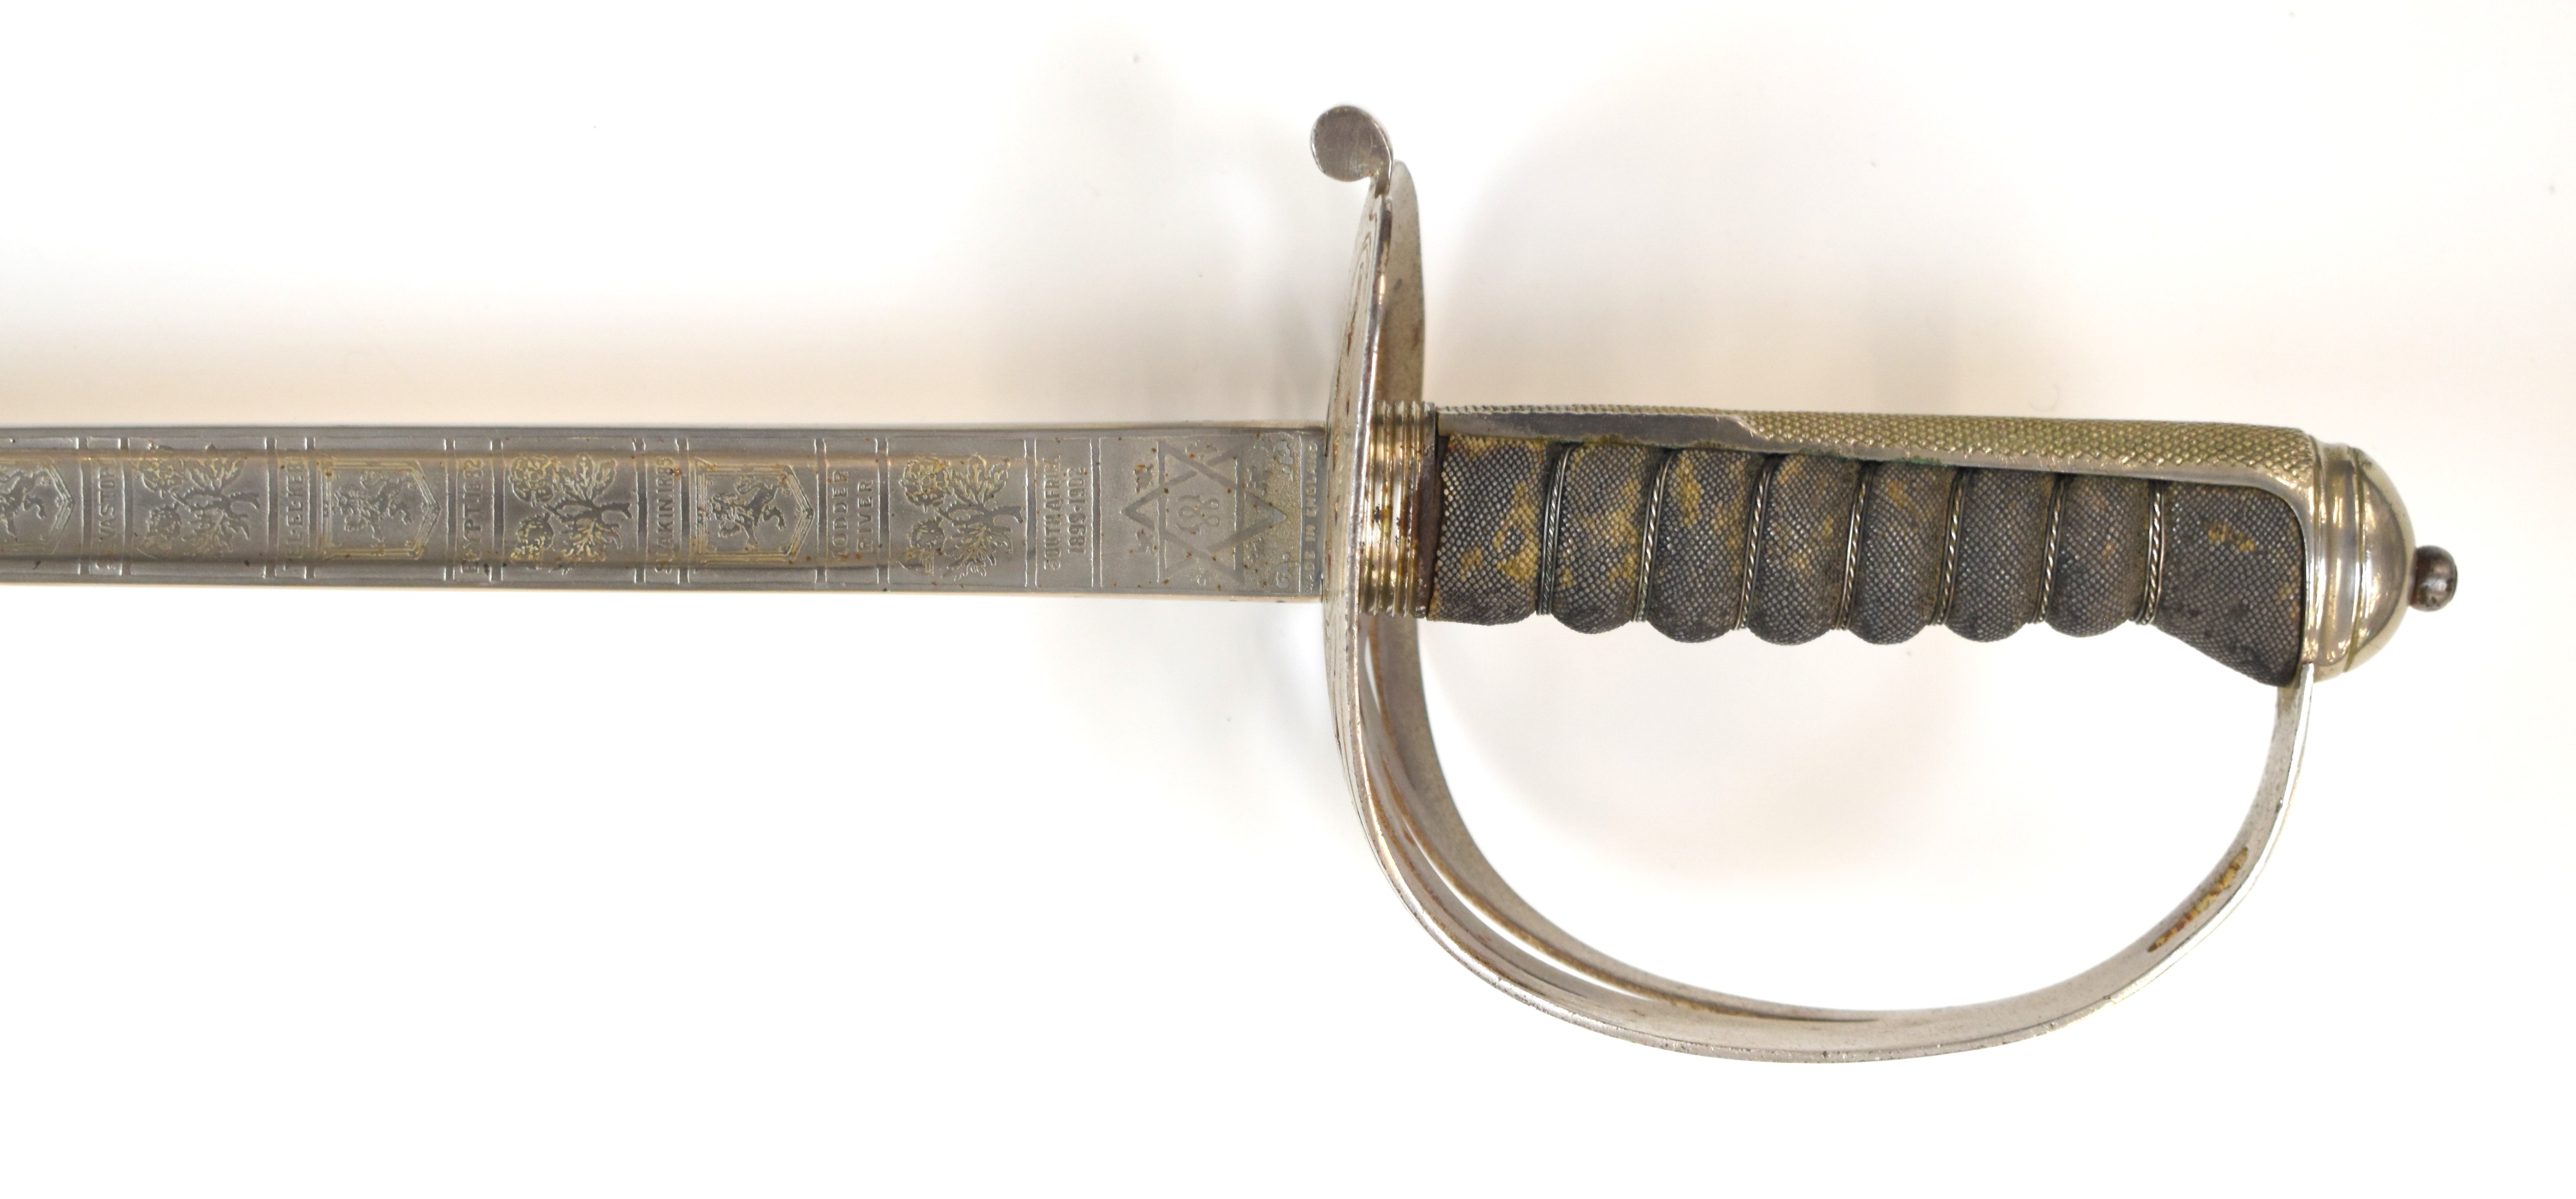 British Army 1854 pattern Scots Guard Foot Guards officer's sword by Wilkinson, number 72148, the - Image 5 of 16